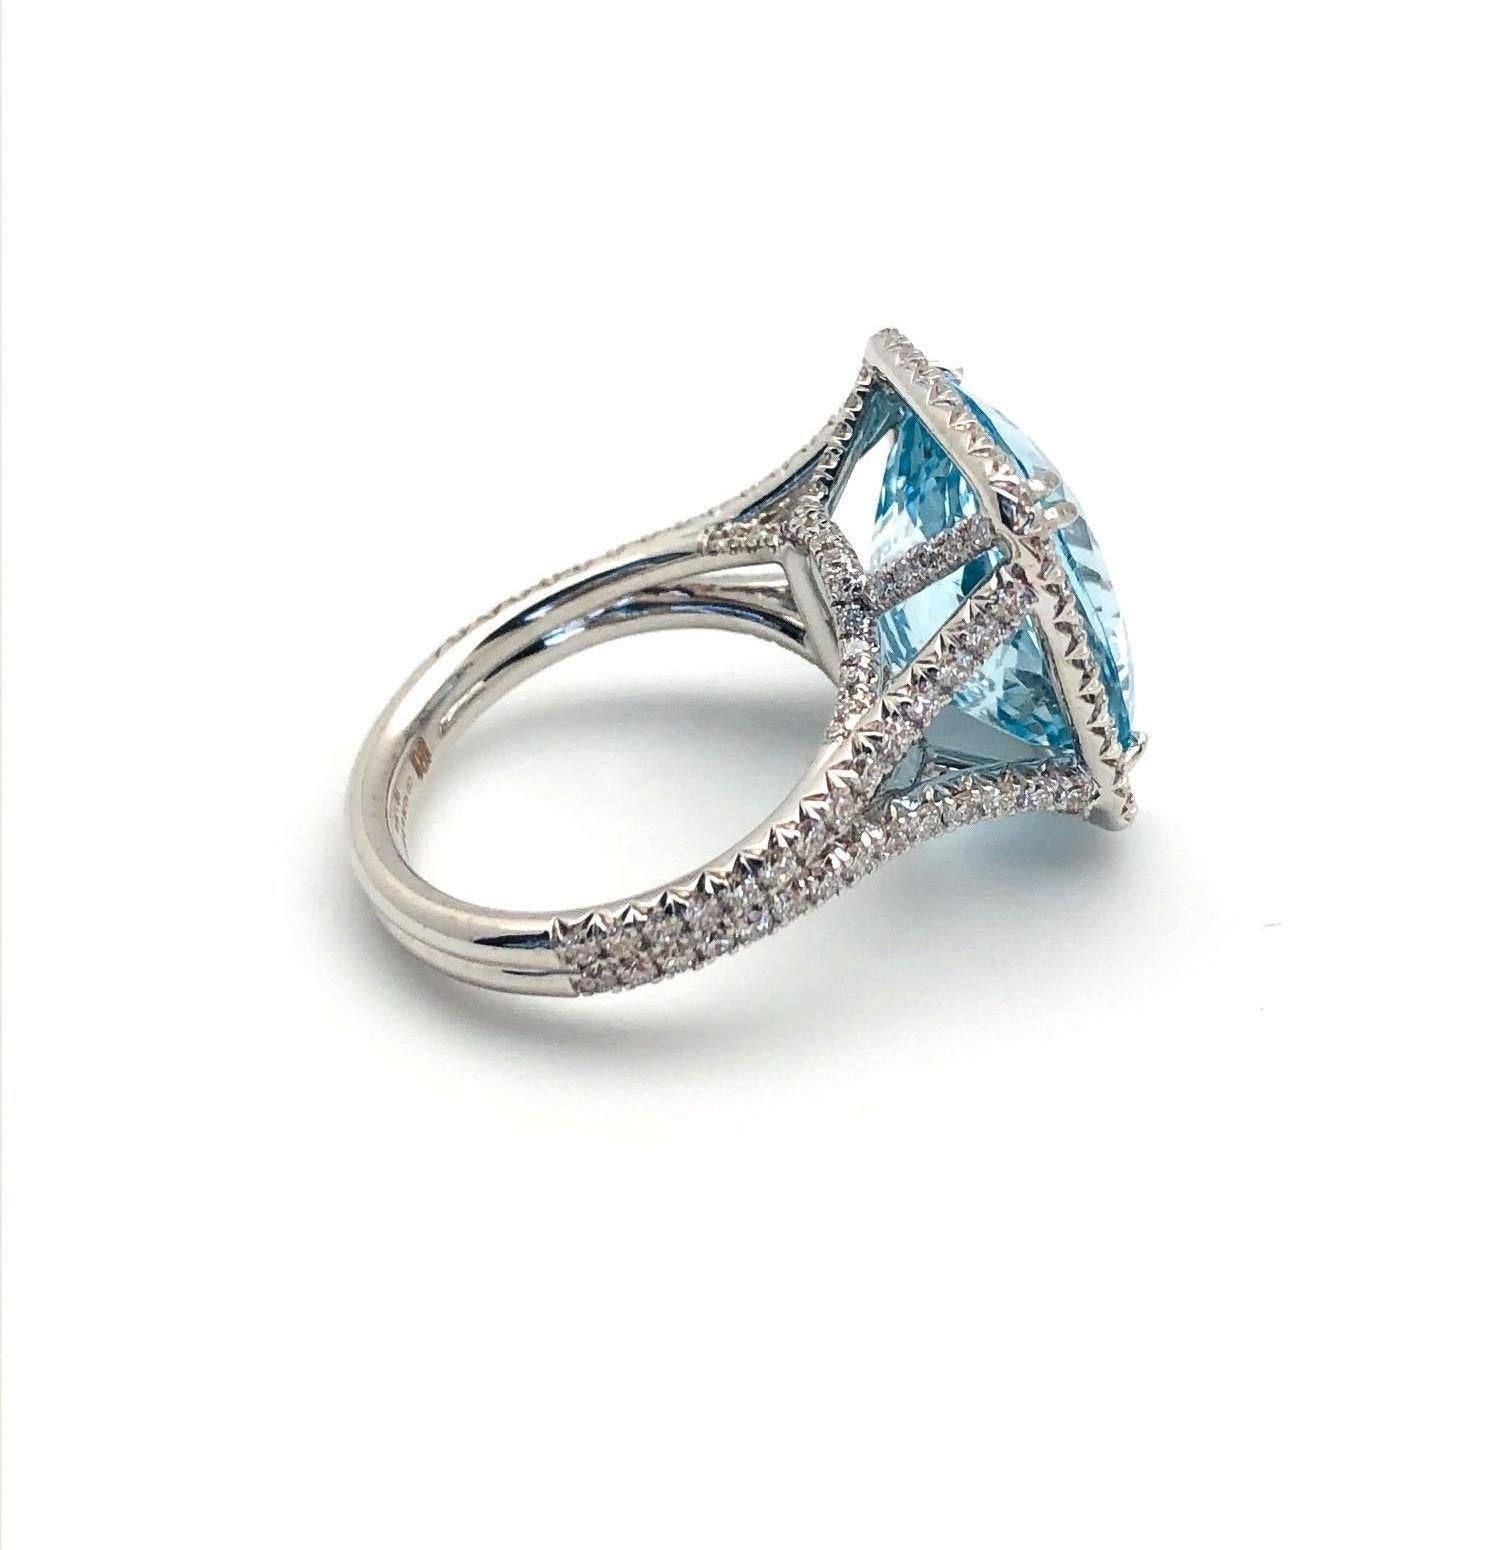 This spectacular aquamarine and diamond halo cocktail ring features a gorgeous 8.70 carat, crystalline blue aquamarine set in 18k white gold with over a carat in diamonds! The impressive center aquamarine is a real gem, with ideal color, a beautiful